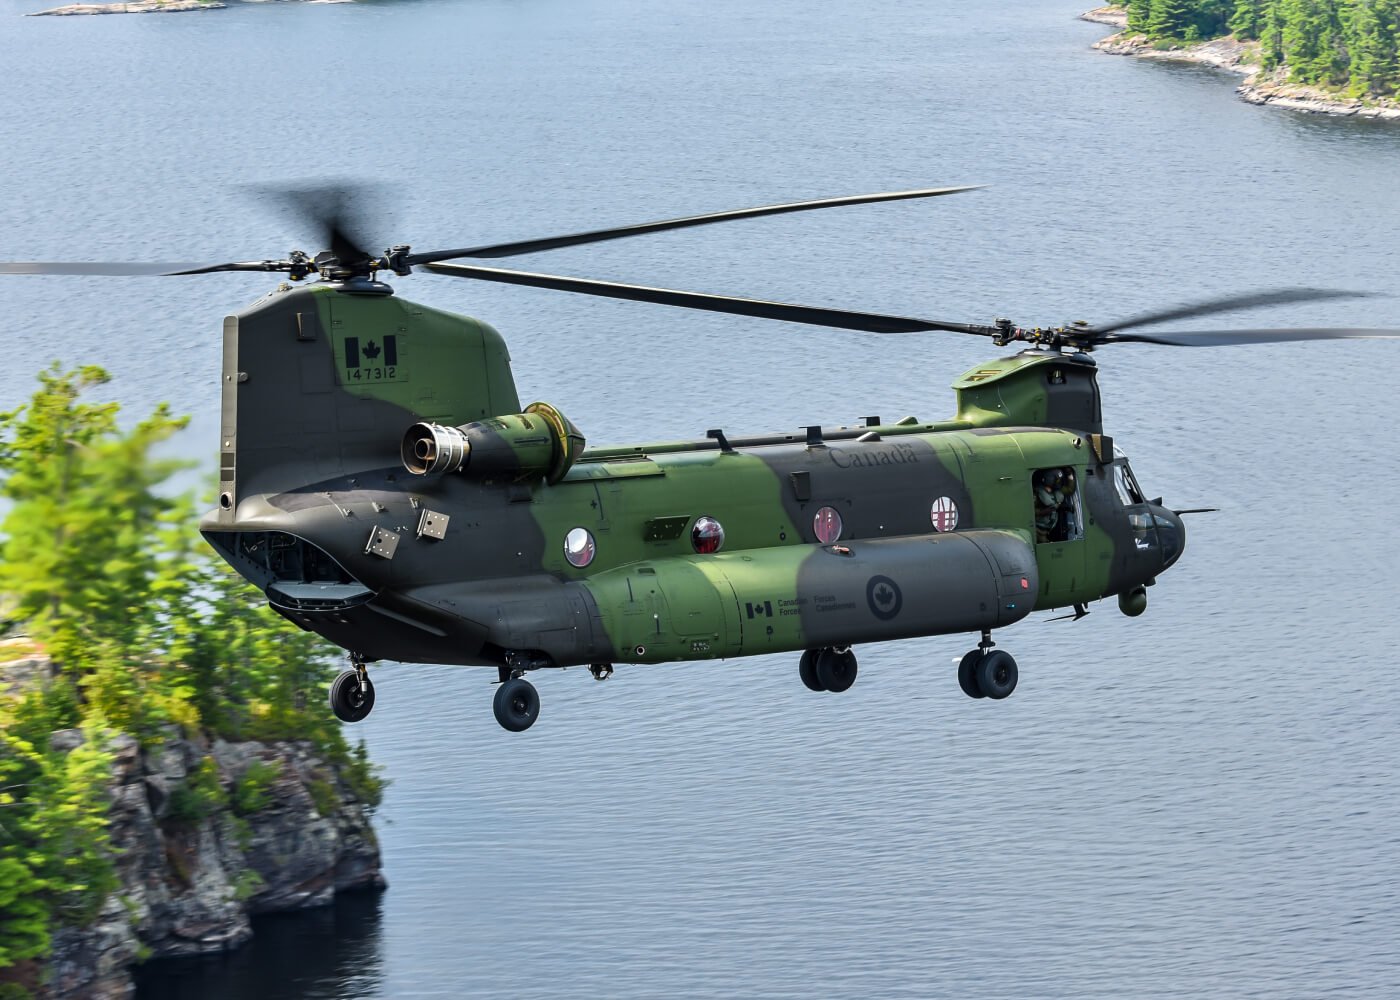 A CH-147F Chinook like the one pictured crashed into the Ottawa River near Garrison Petawawa on June 20, killing both pilots on board. Mike Reyno Photo